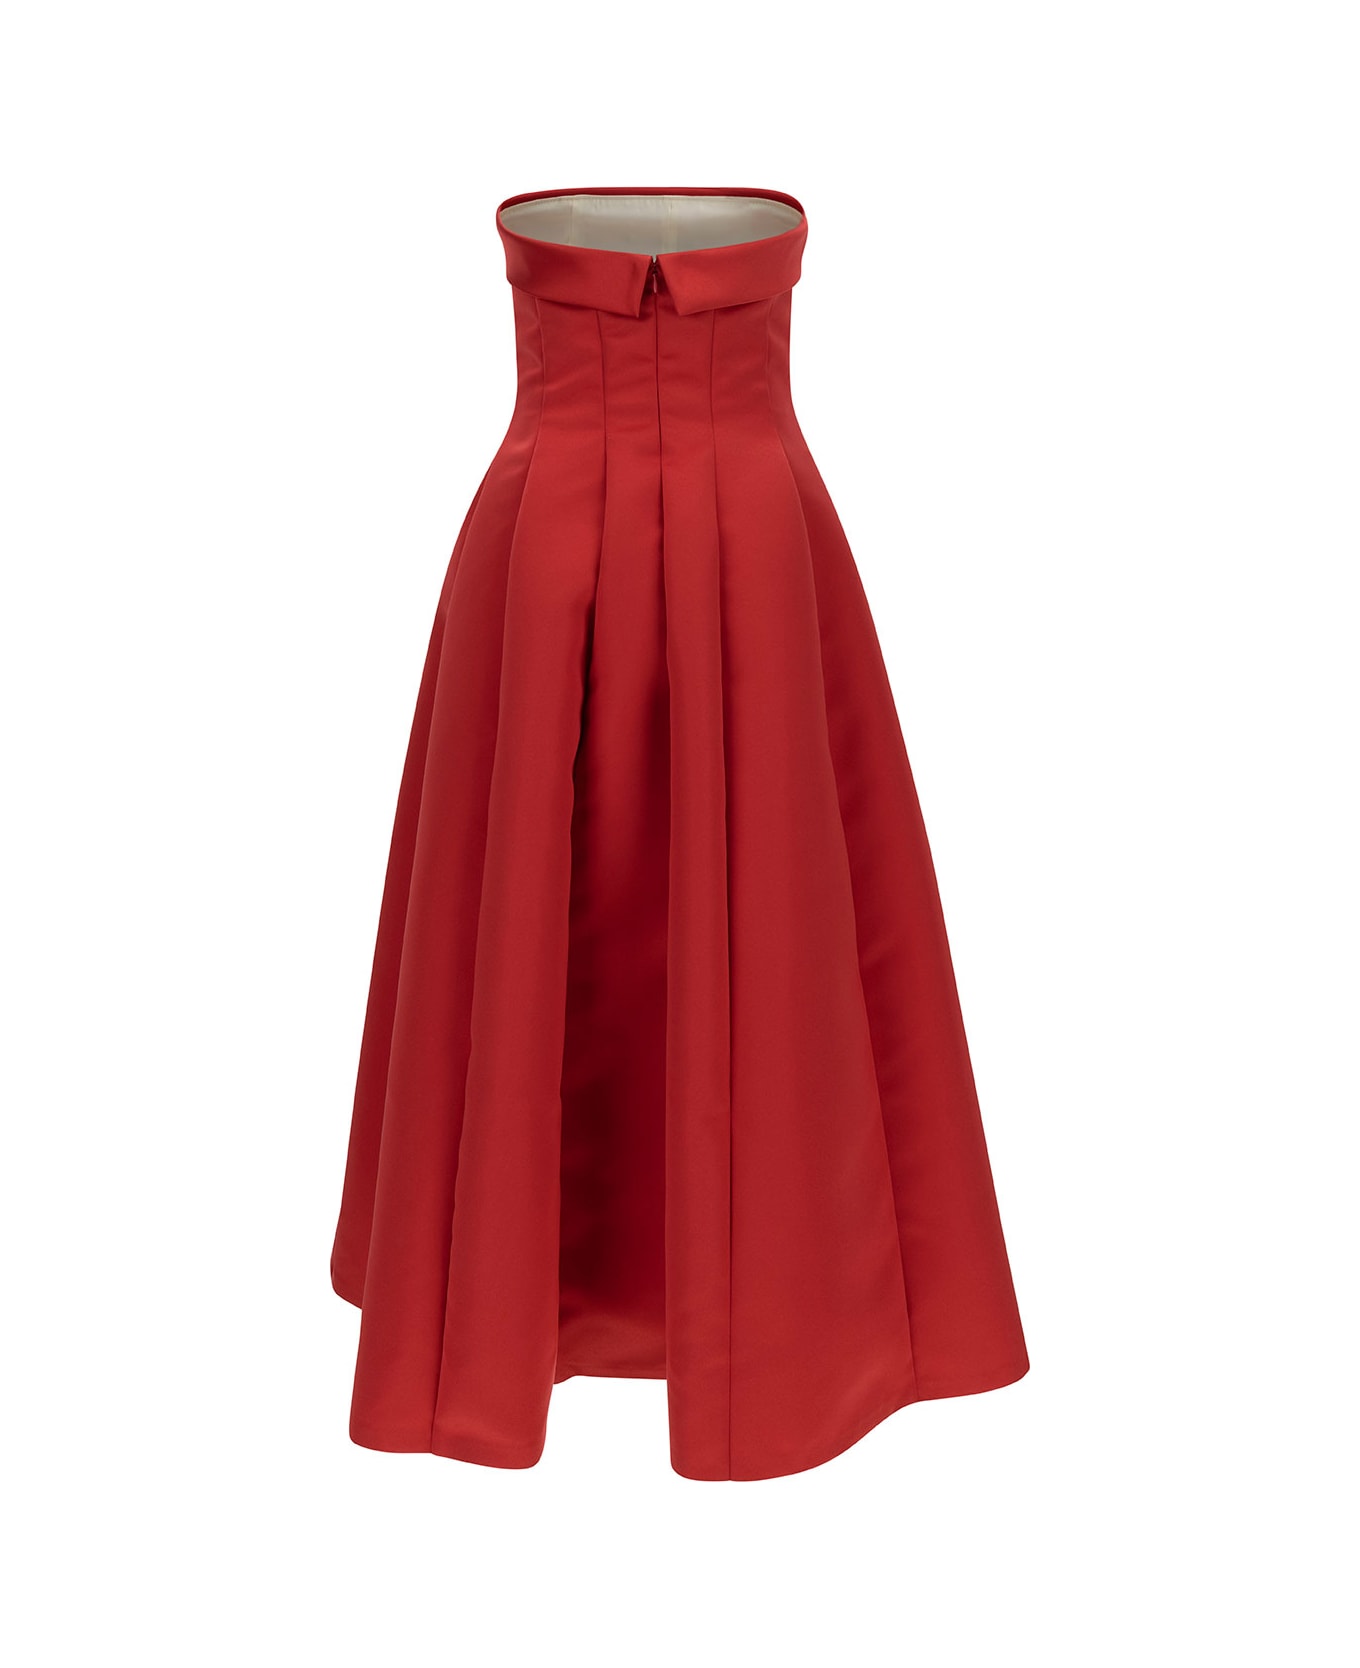 Philosophy di Lorenzo Serafini Longuette Red Dress With Flared Skirt In Duchesse Woman - Red